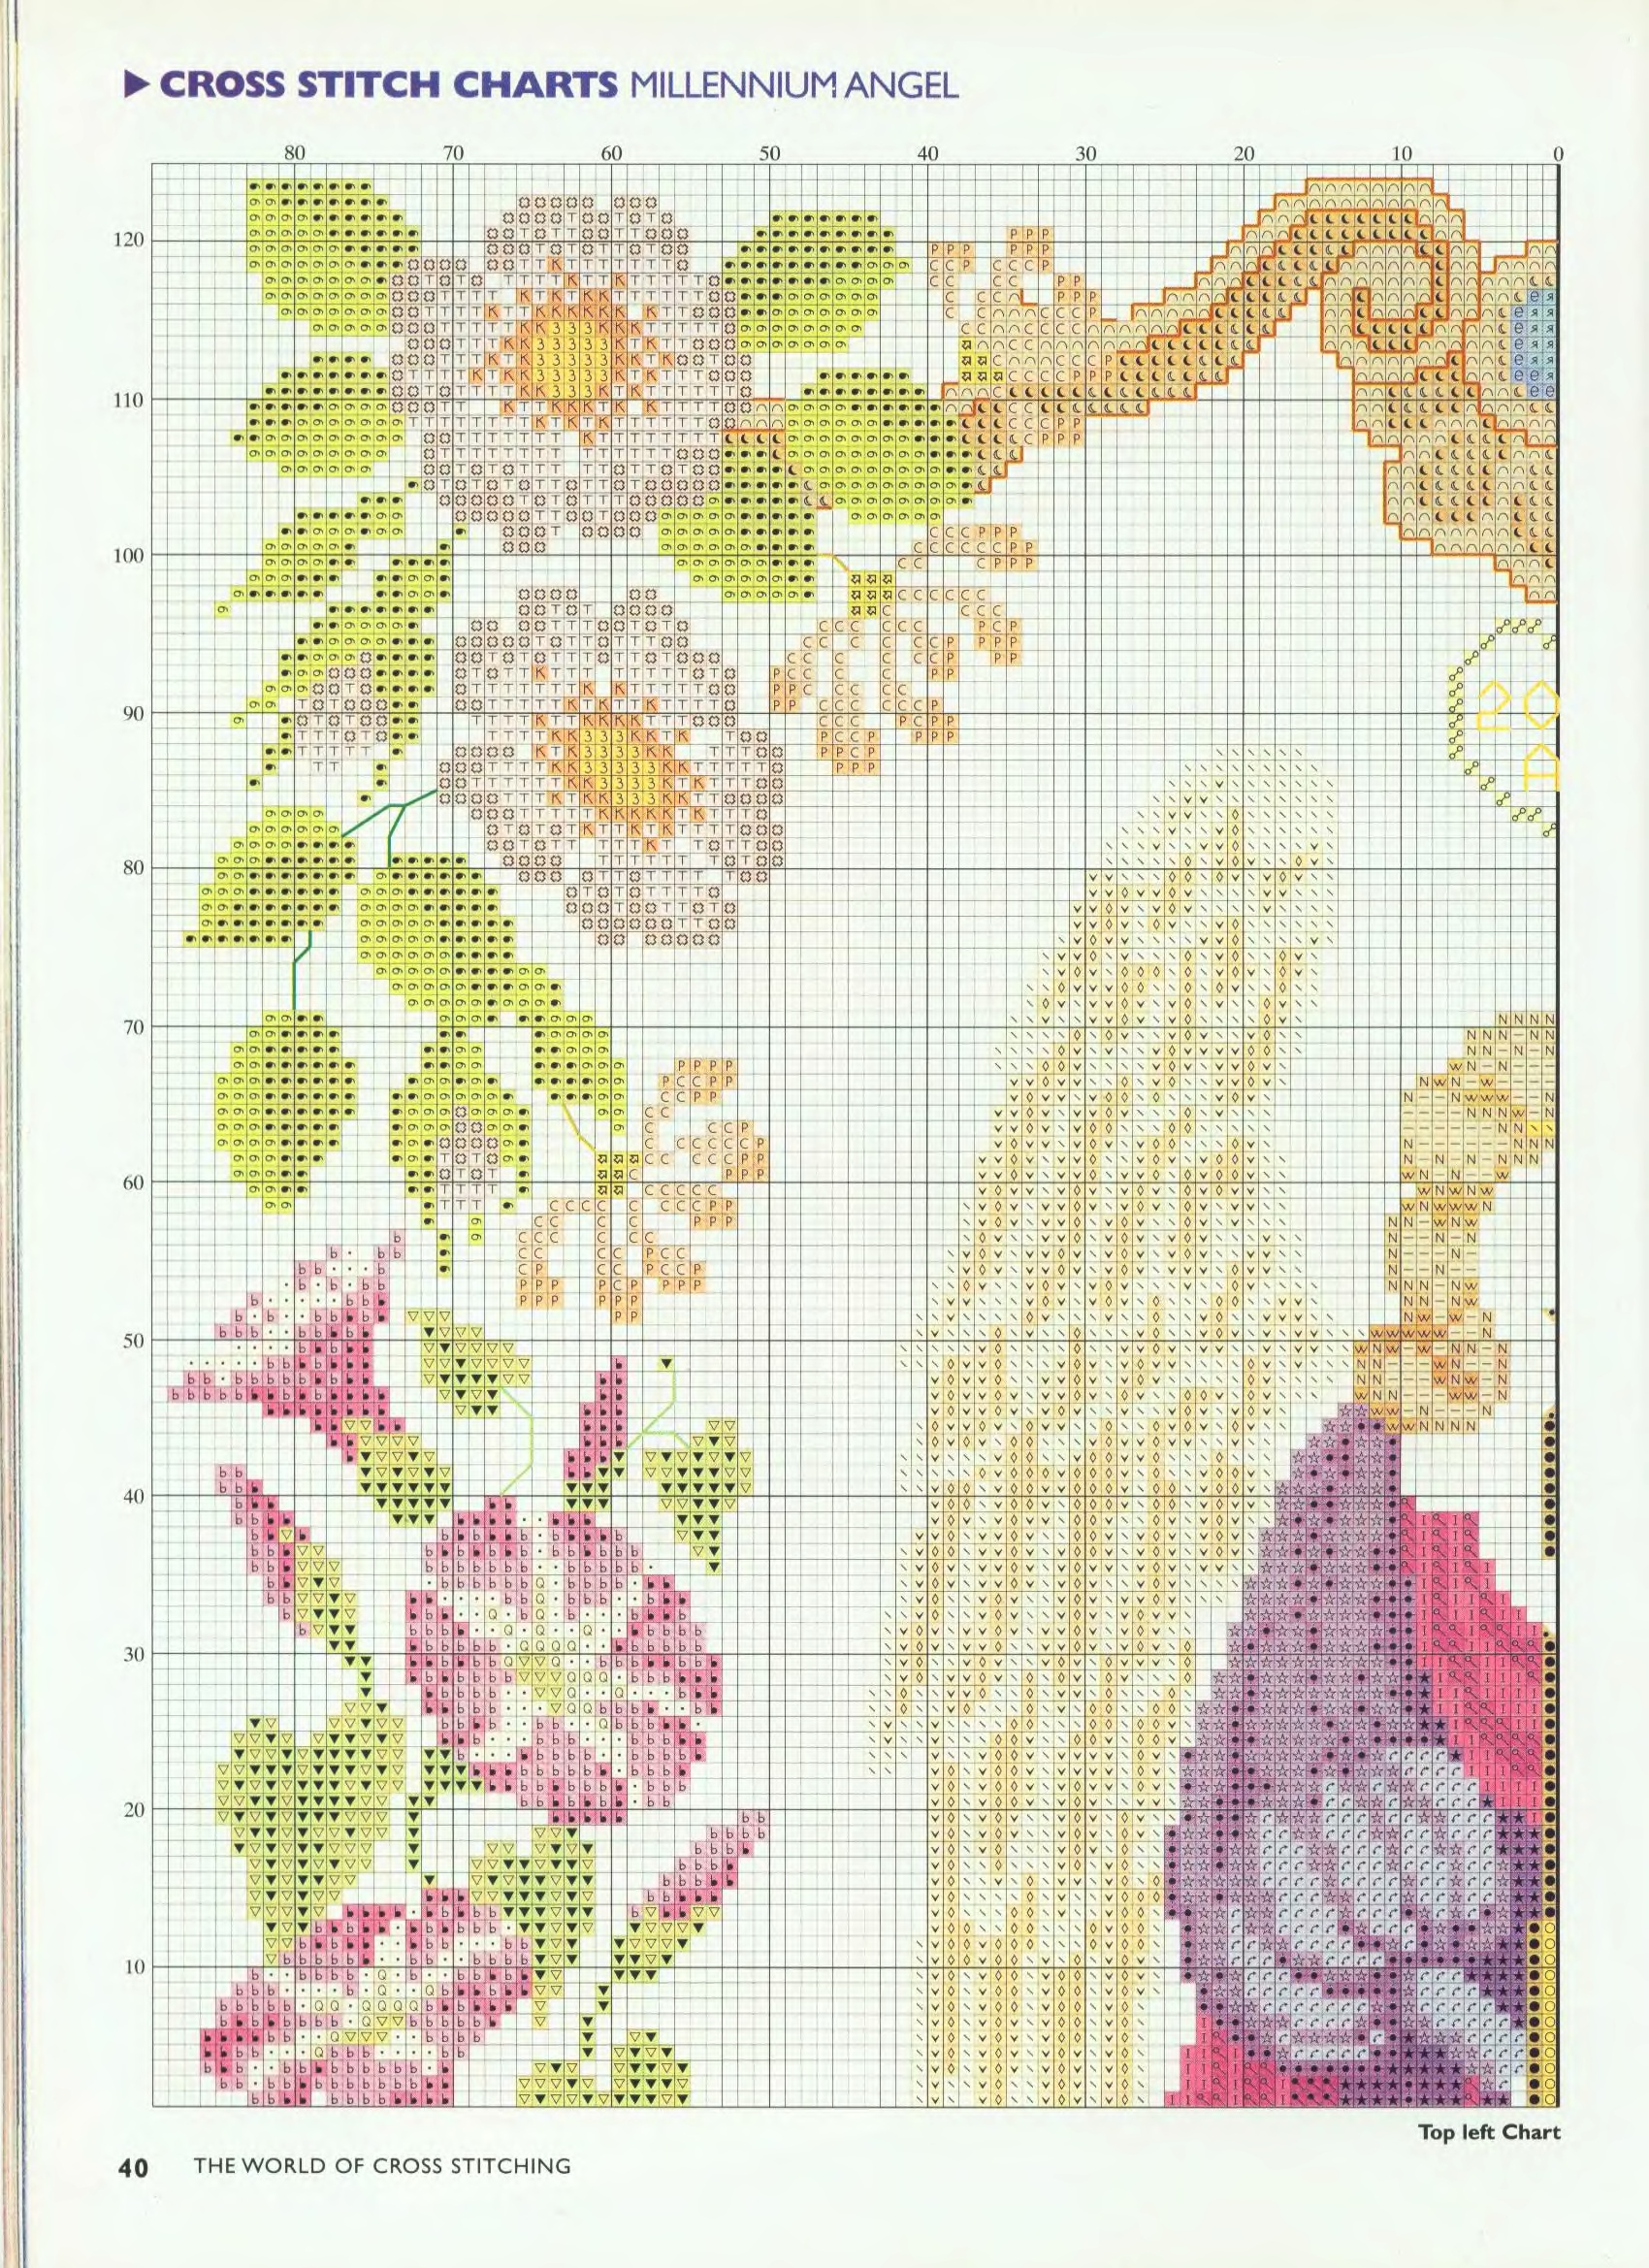 The Angel of the Millennium cross stitch patter (2)